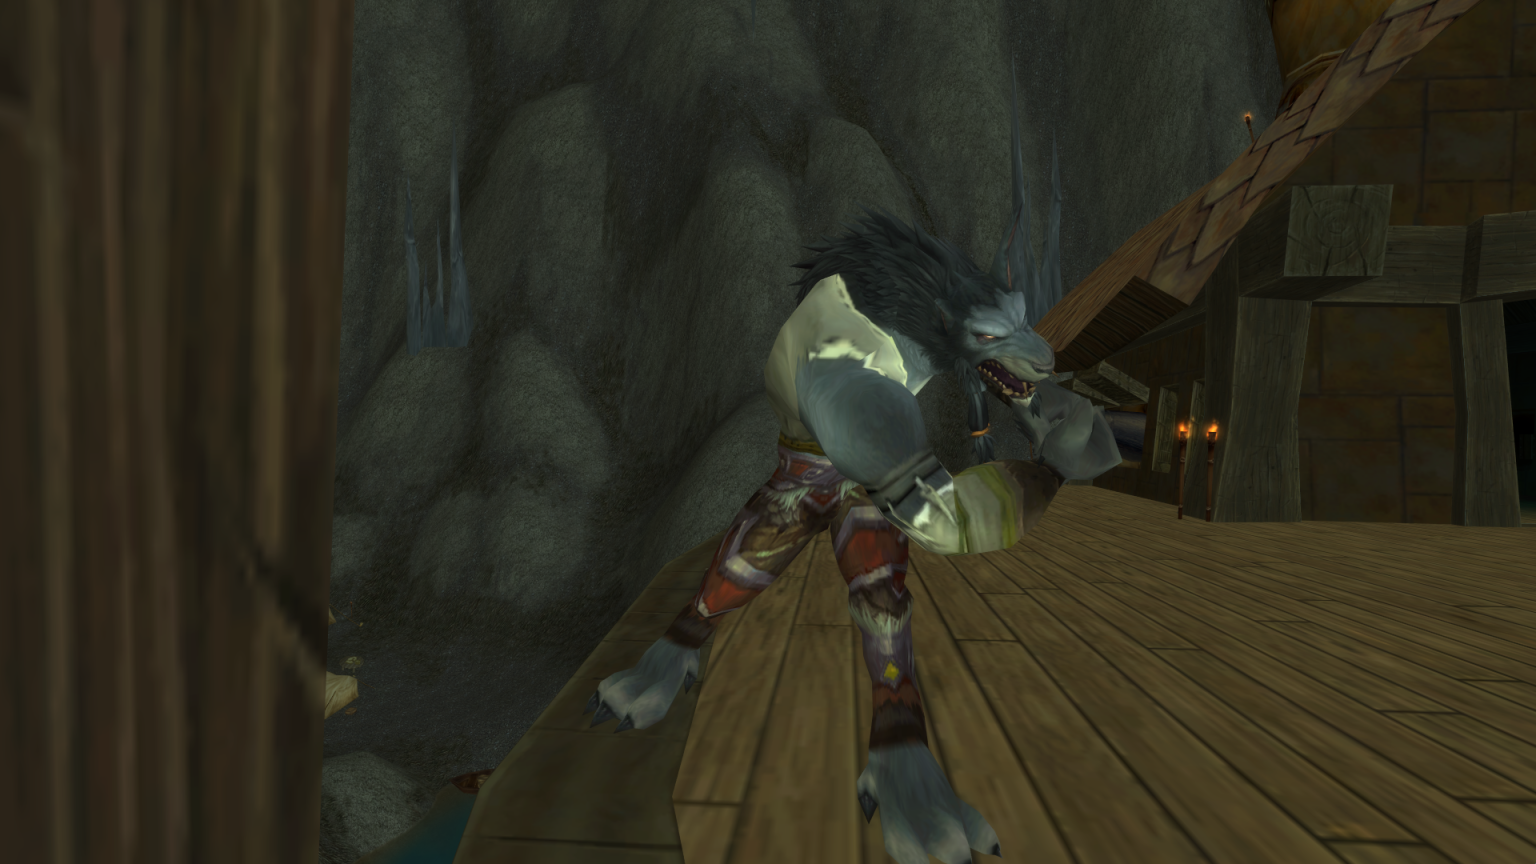 Prime Gaming Loot: Get the Silver Pig Pet in WoW - News - Icy Veins